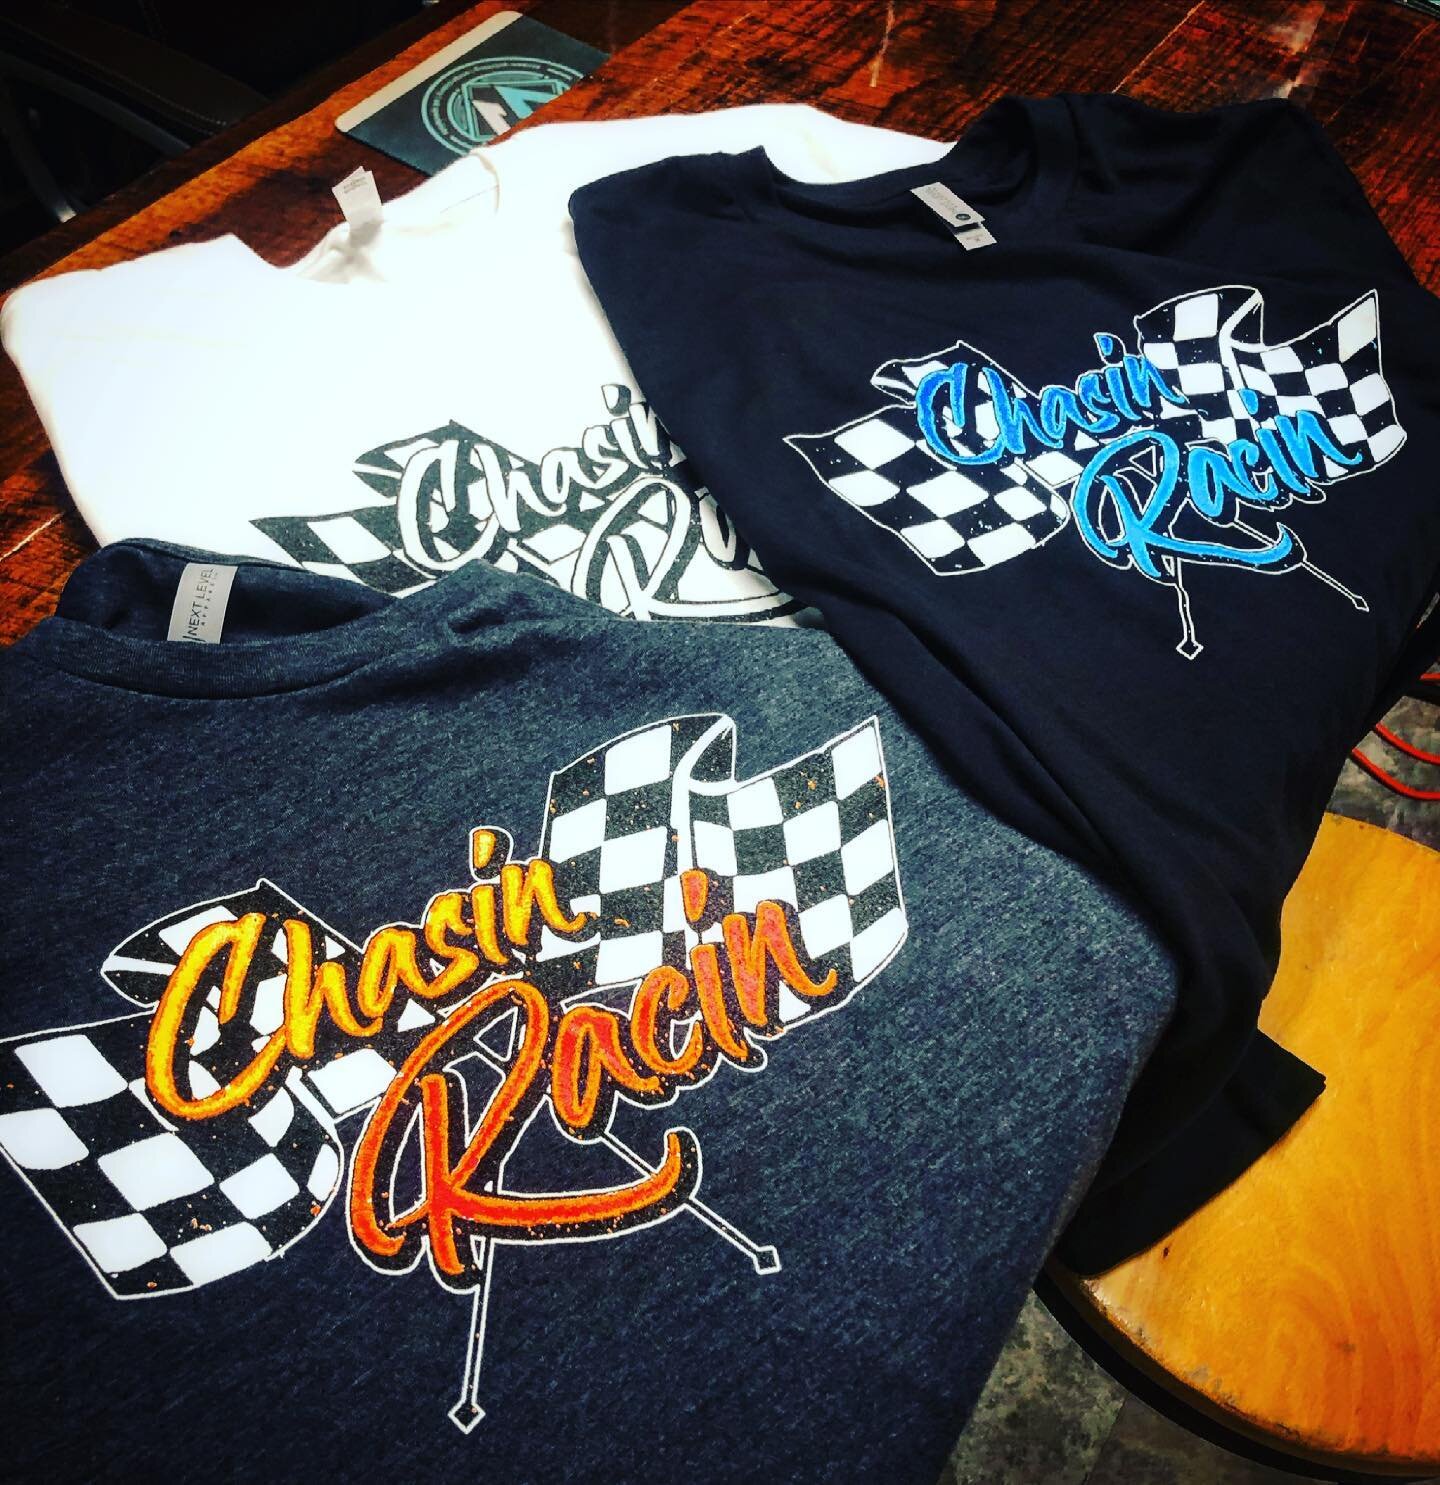 A buddy of mine asked me if he could have some shirts for Bristol this weekend. I said hell yeah brother let&rsquo;s go racin! It&rsquo;s Bristol baby!! #chasinracin